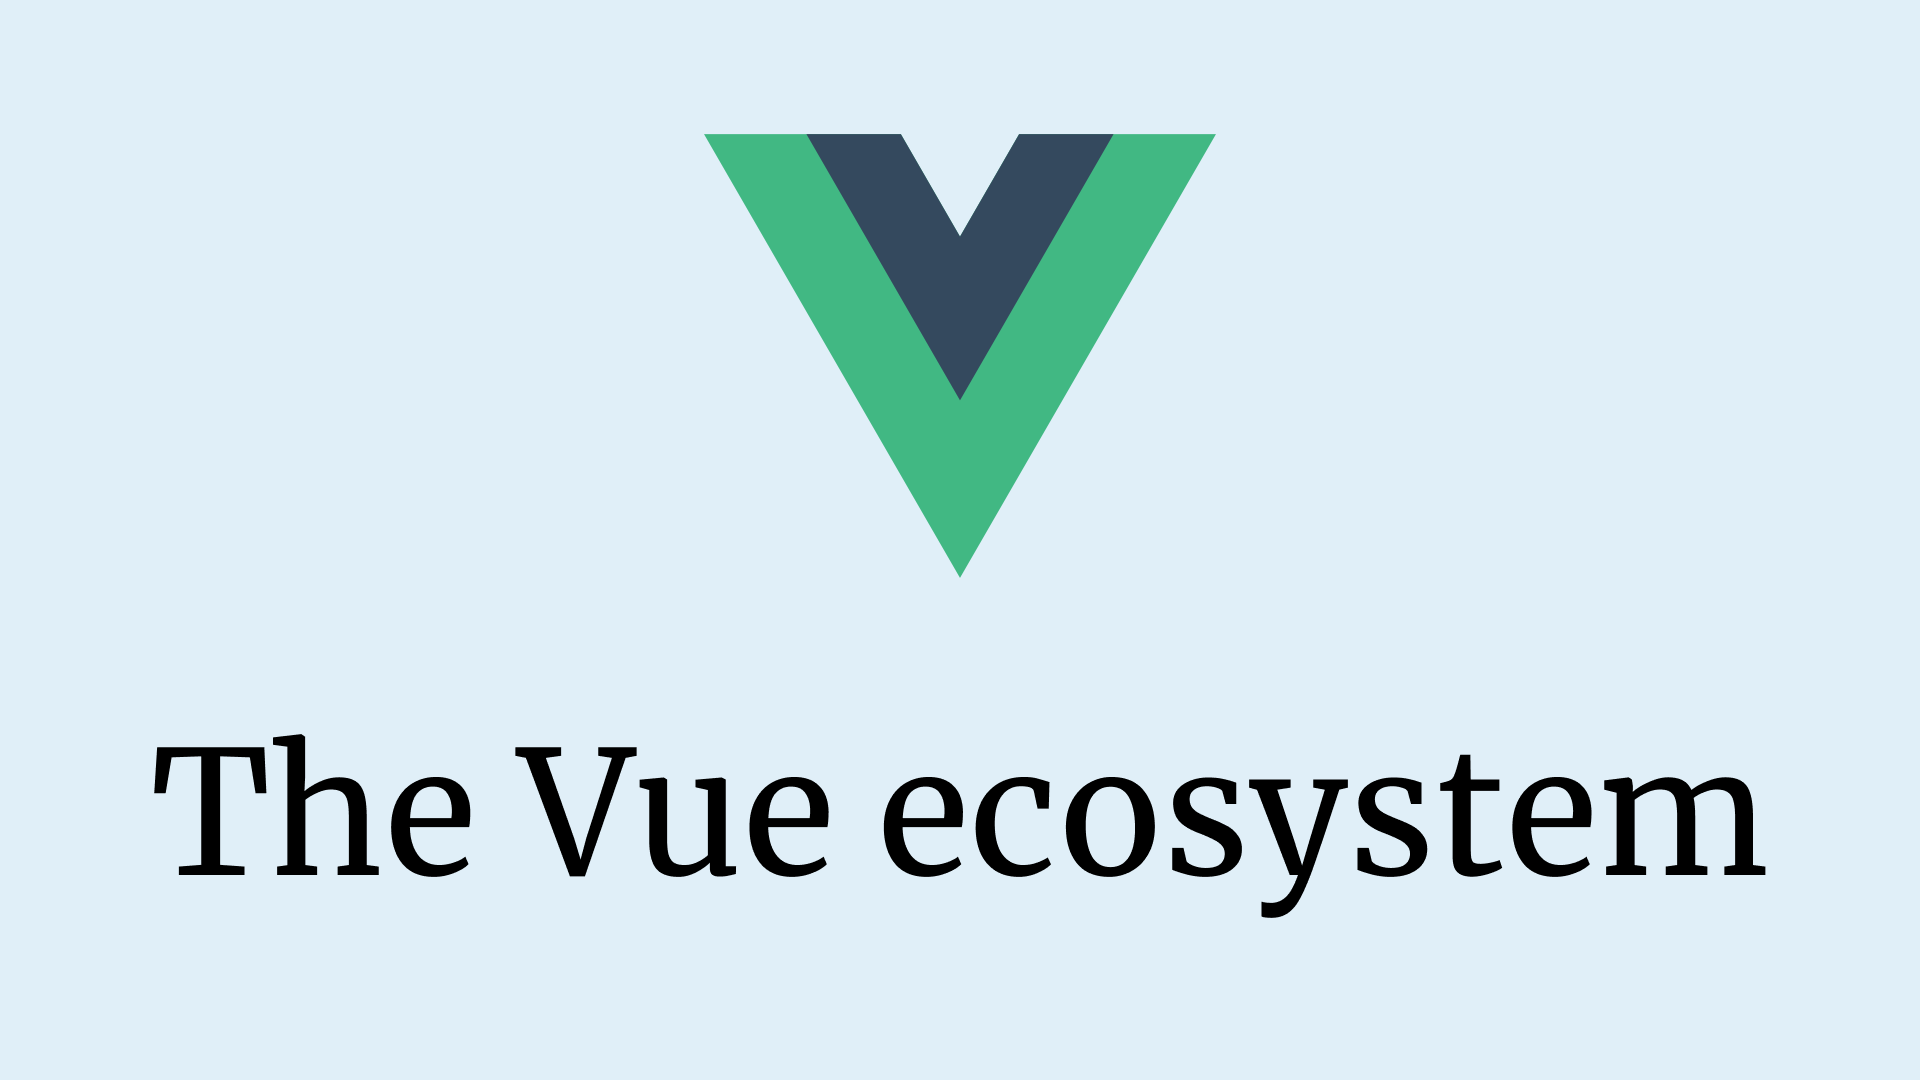 Opinions on The Vue ecosystem